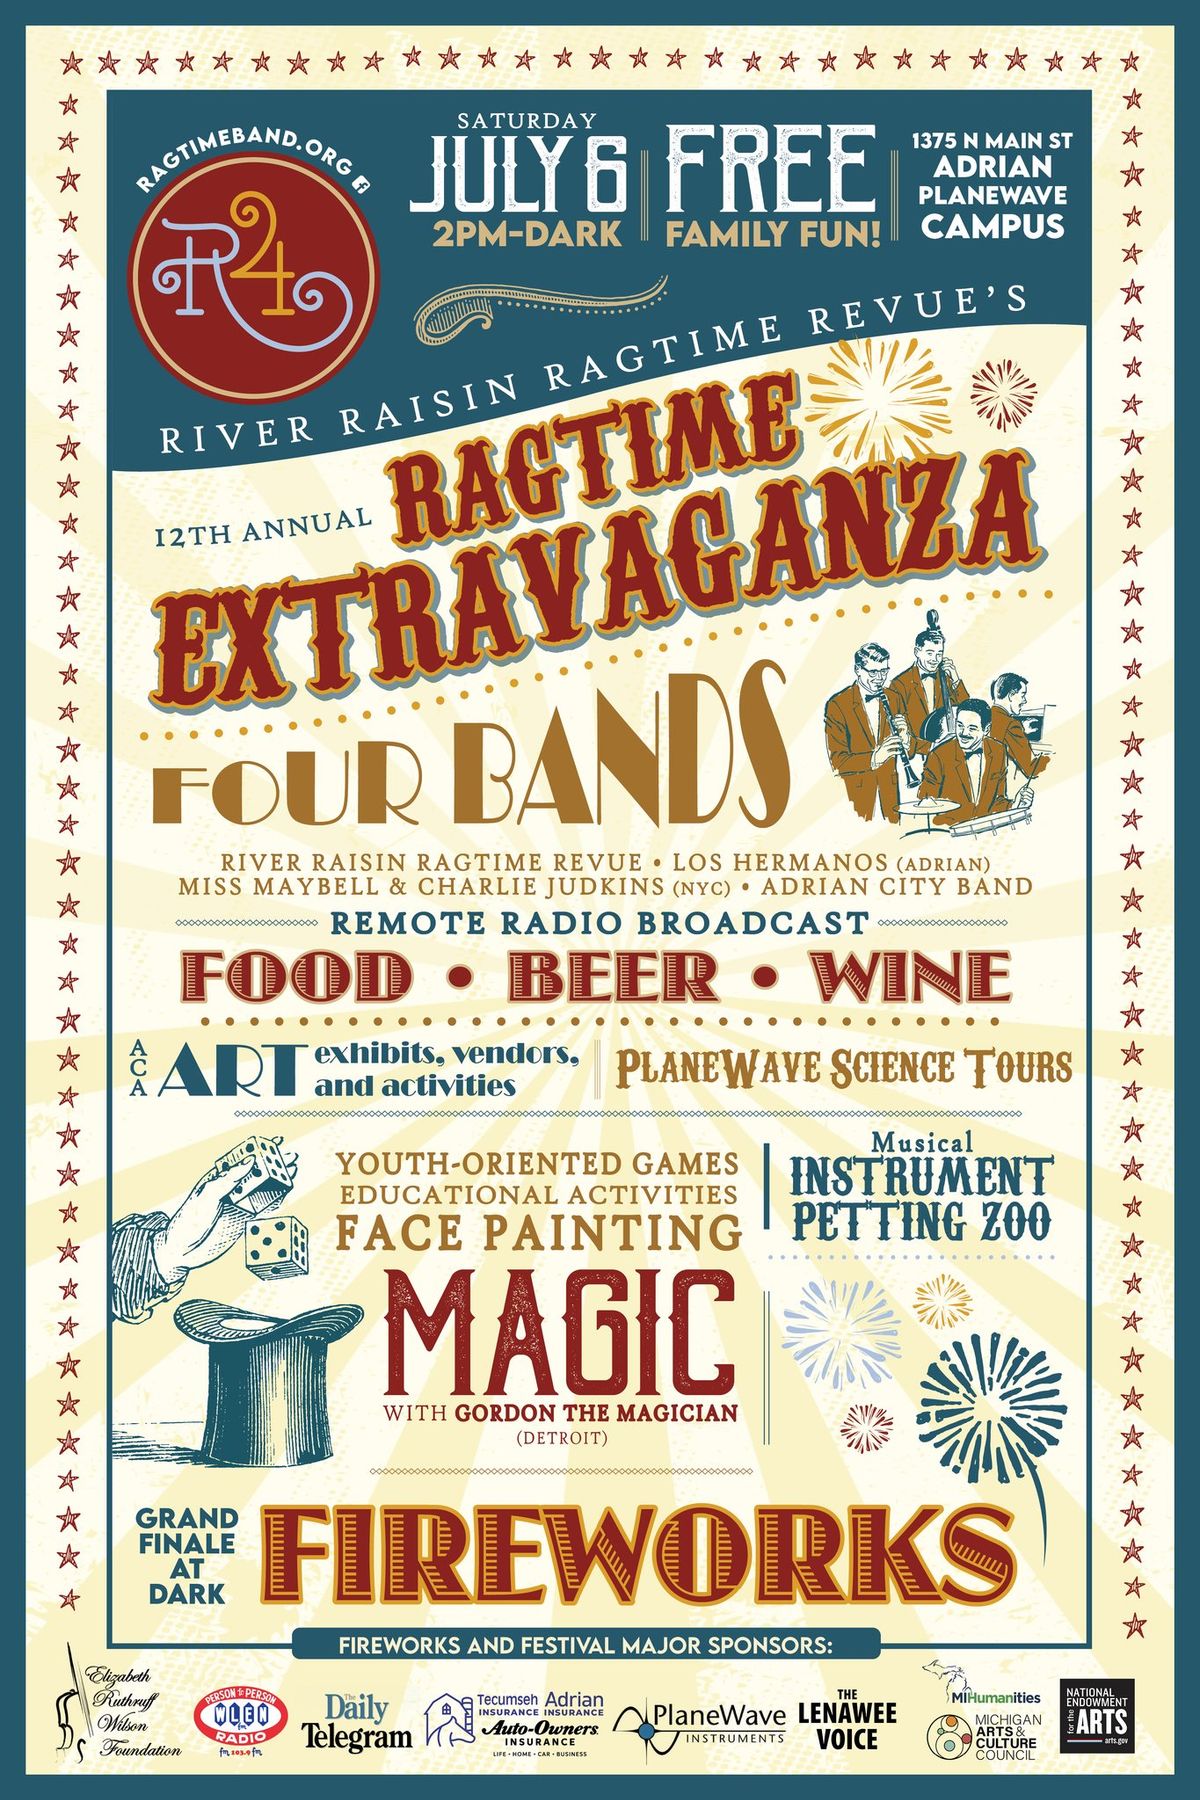 12th Annual Ragtime Extravaganza and Community Fireworks